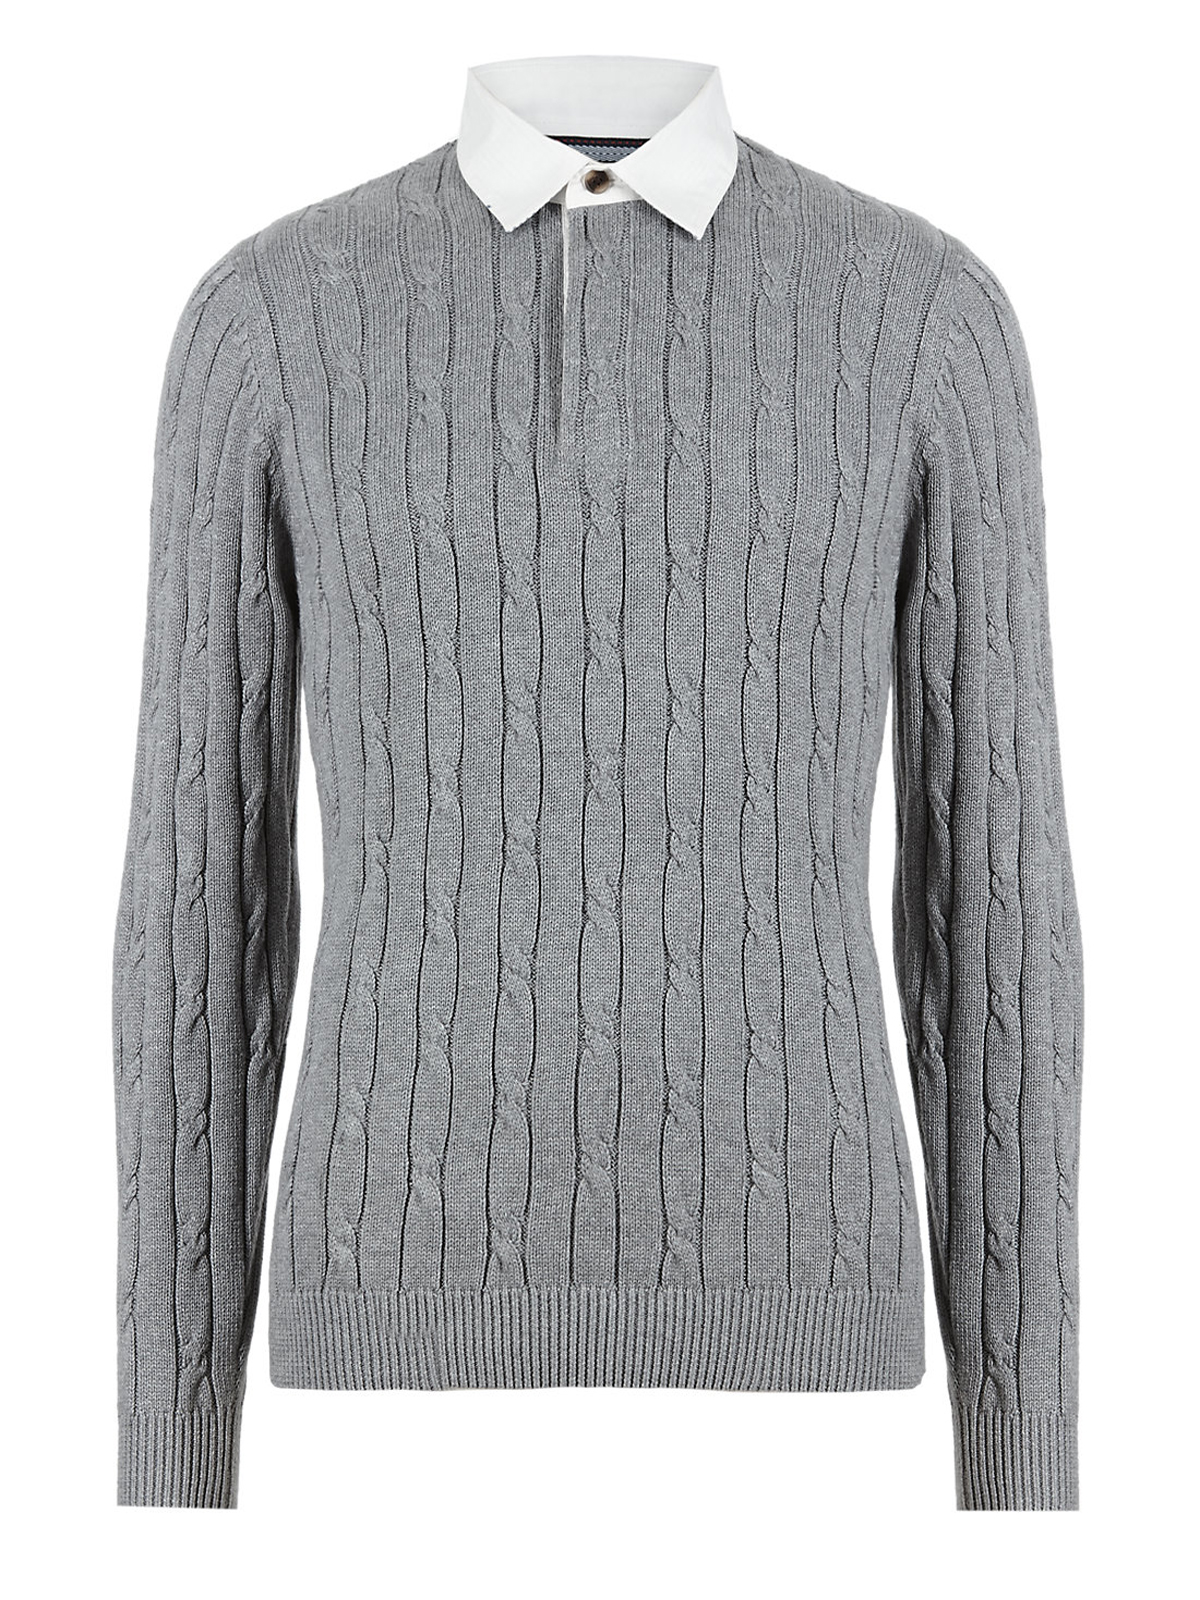 Marks and Spencer - - M&5 Blue H4rbour GREY Pure Cotton Cable Knitted ...